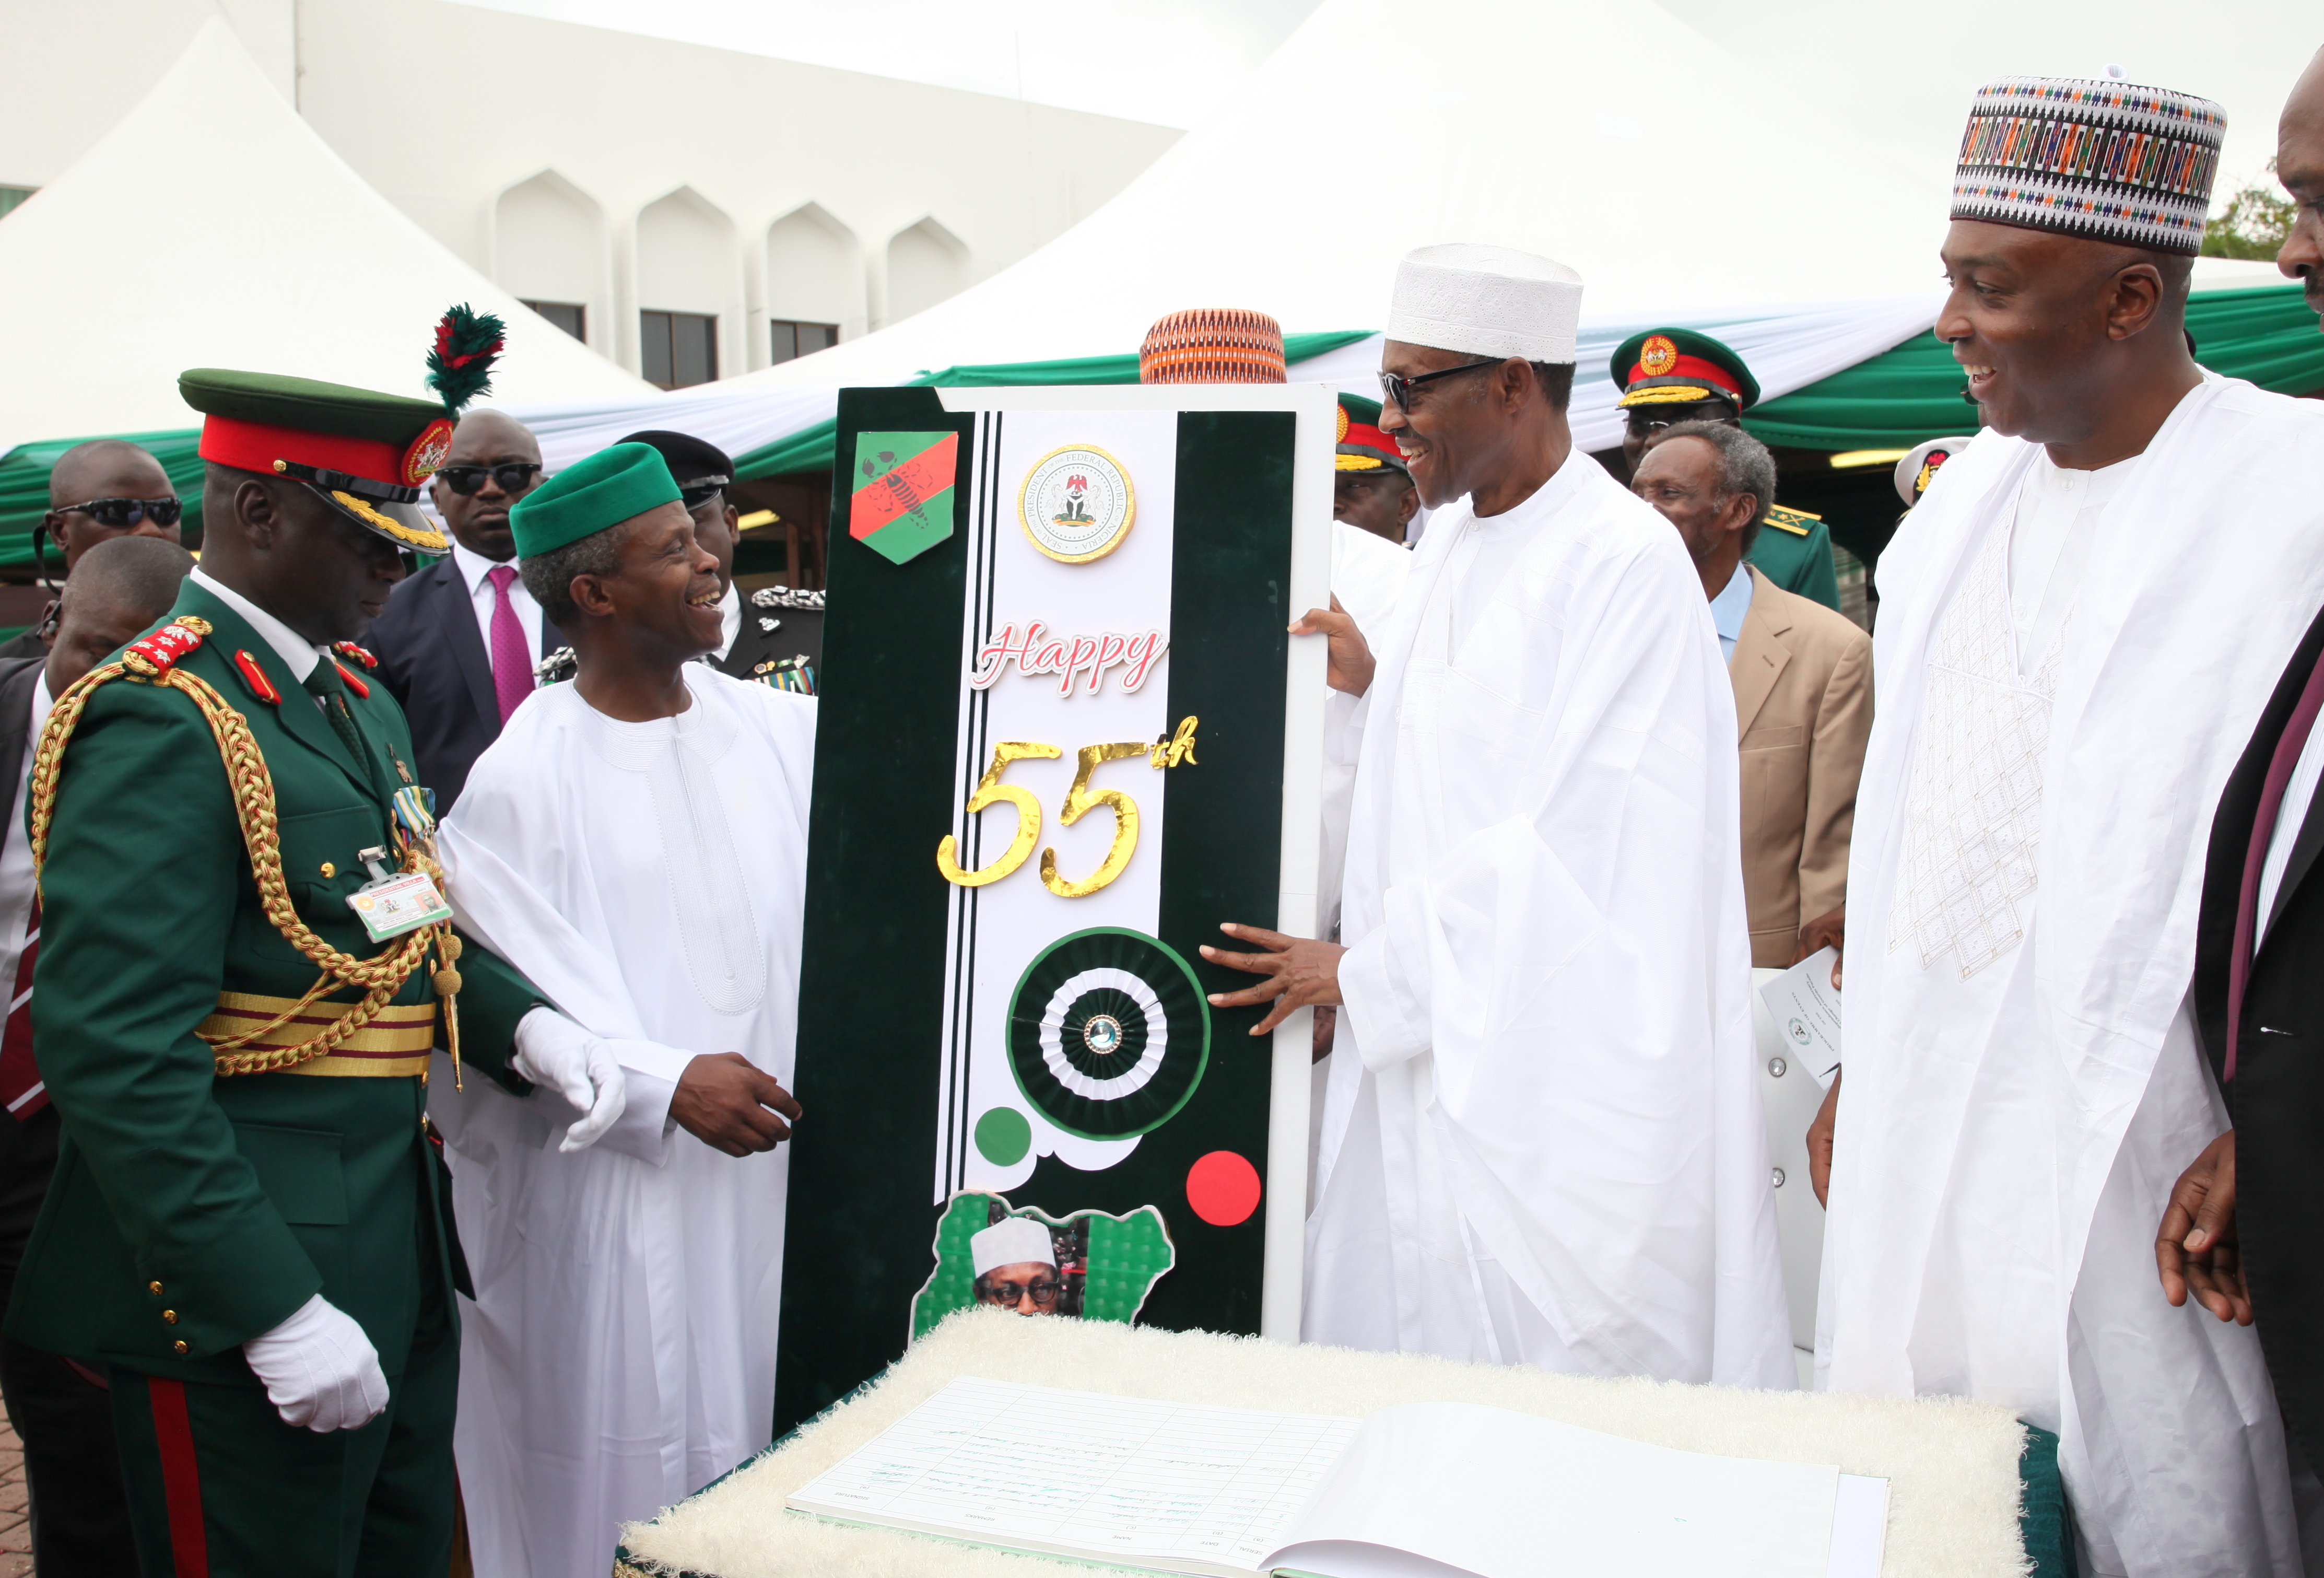 VP Osinbajo At The Independence Day Celebration (Presidential Change of Guards) On 01/10/2015